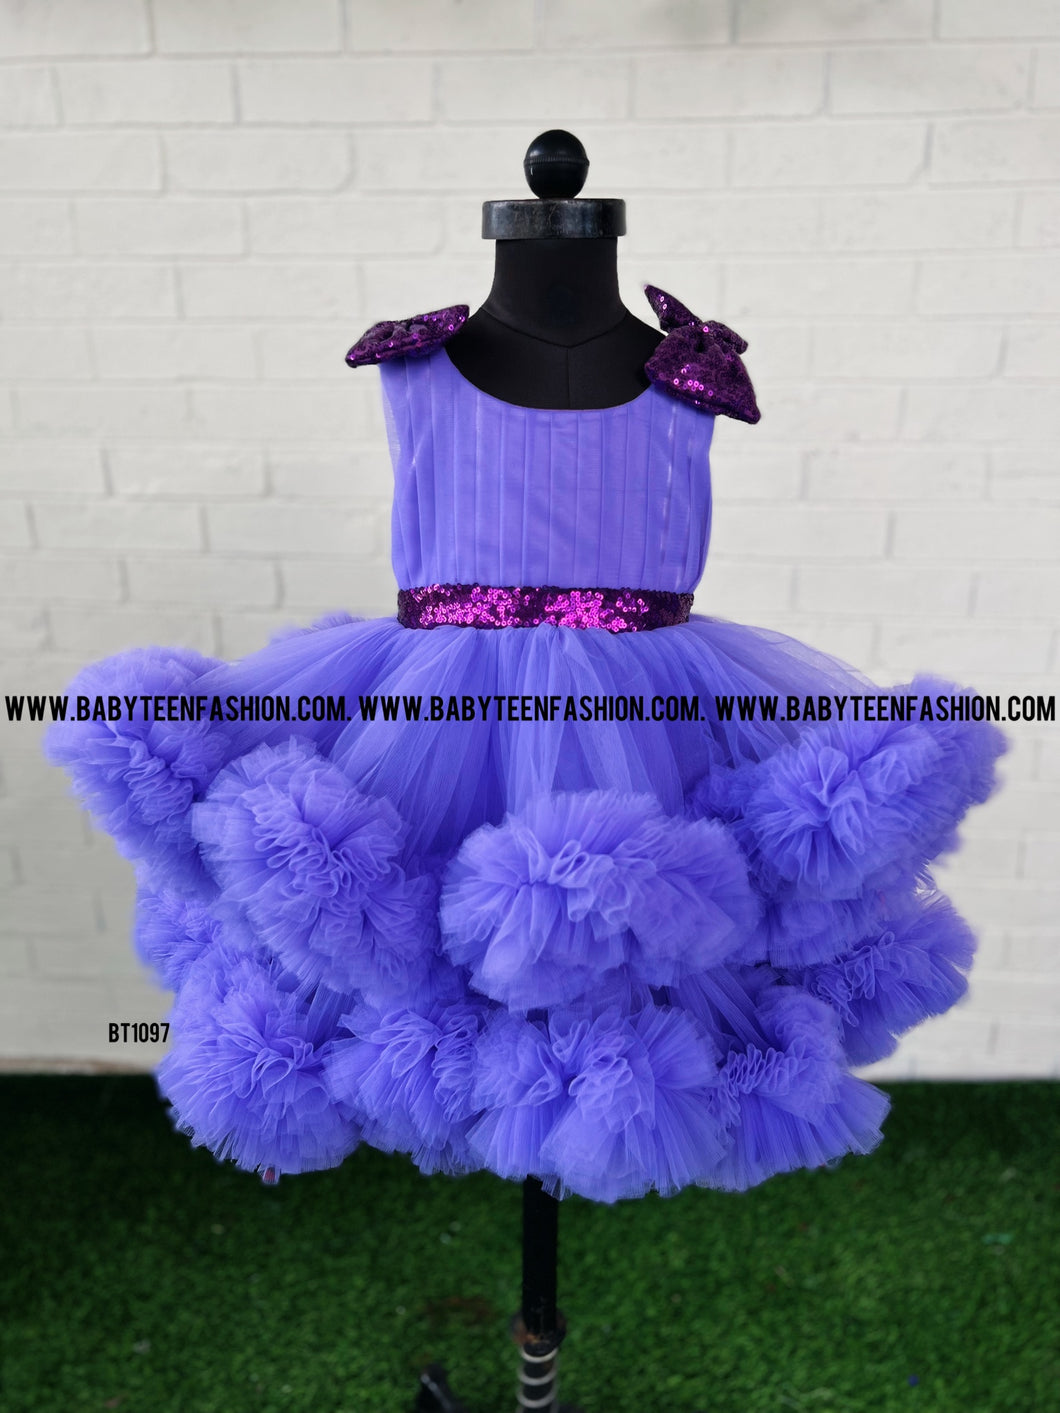 BT1097 Lavender Birthday Outfit